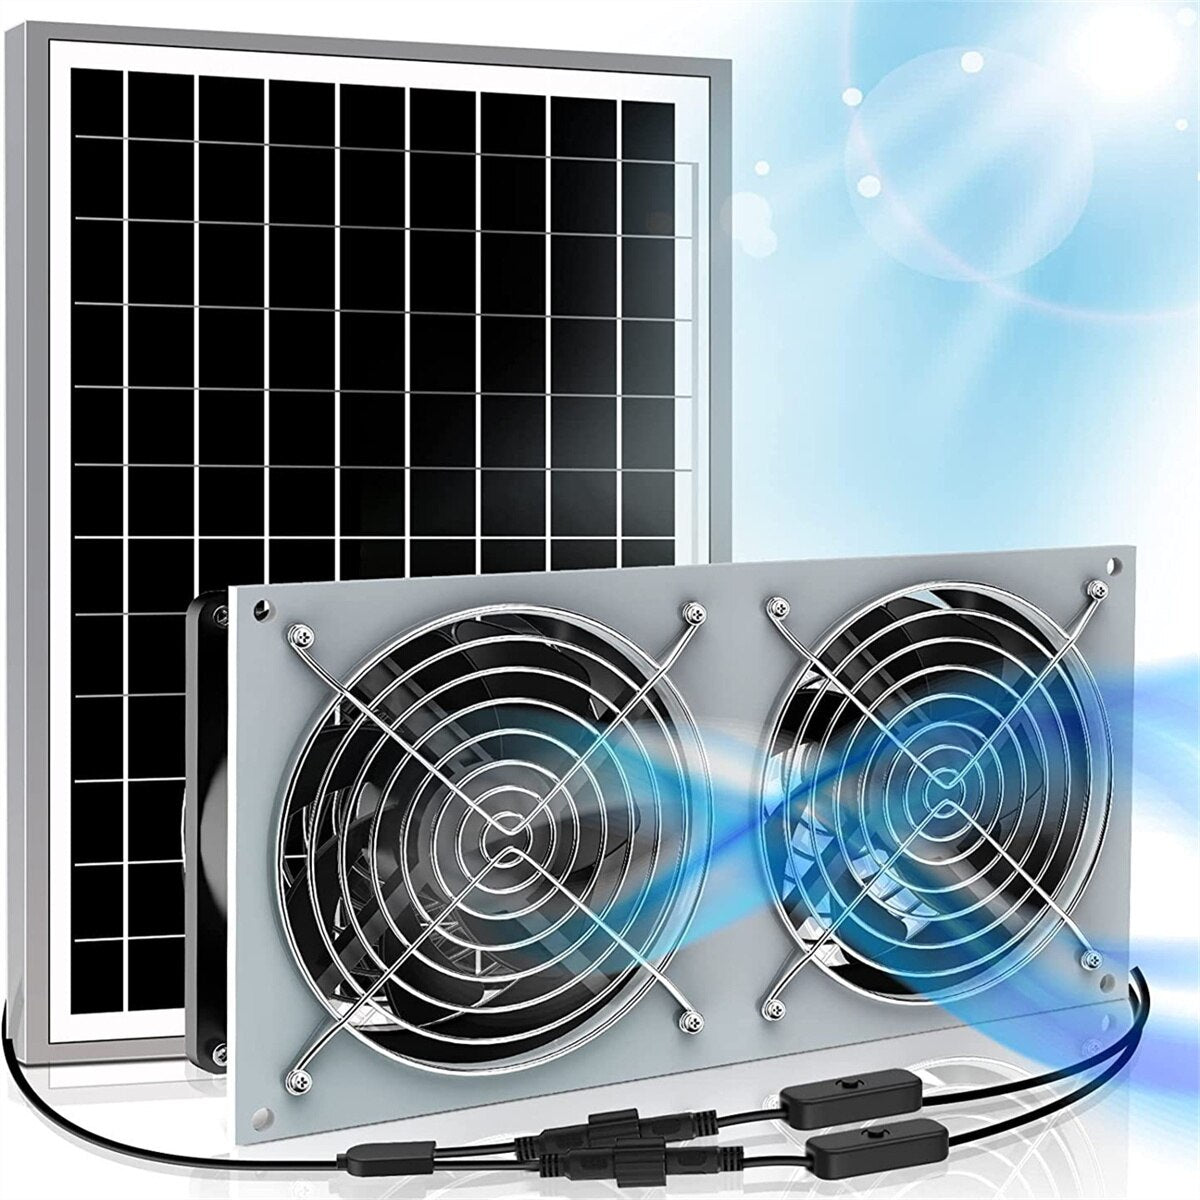 Solar Power Fan - LOW Price for our OFF Grid Friends!